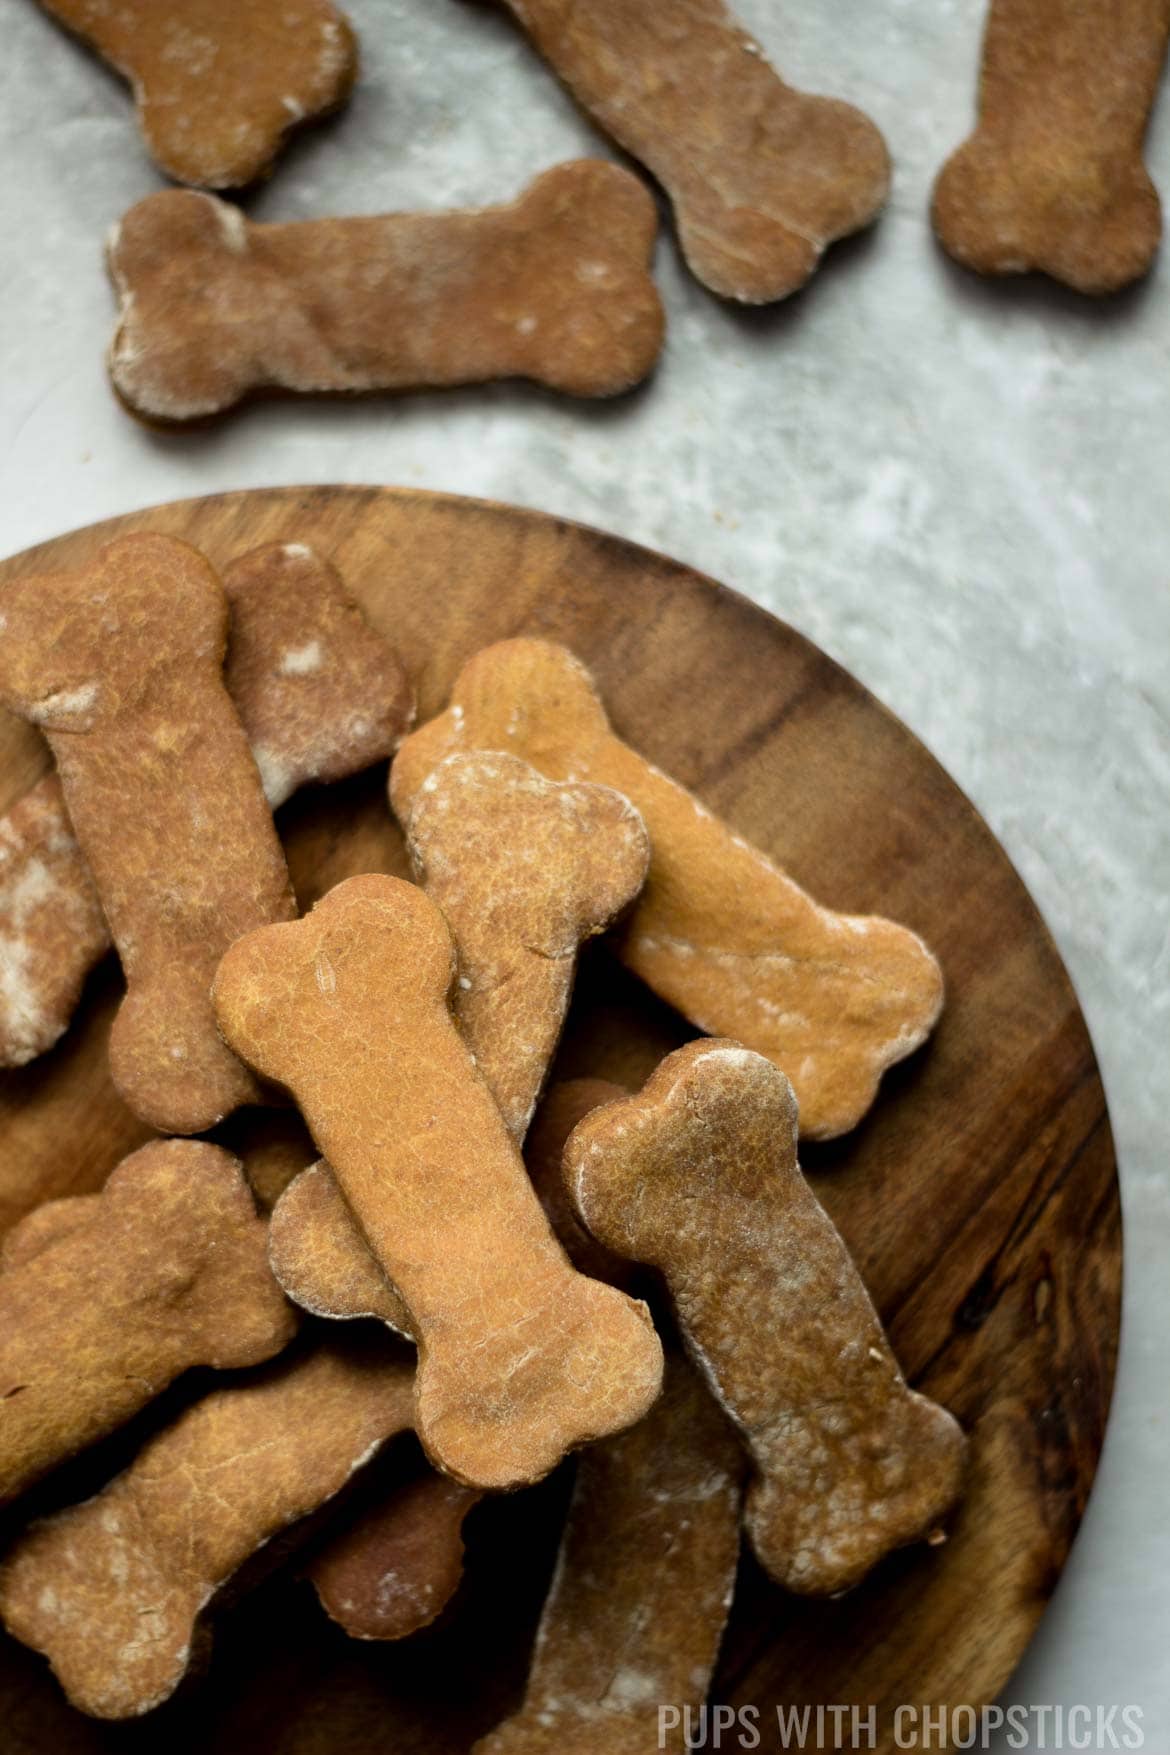 Grain free dog treats in a pile on the table